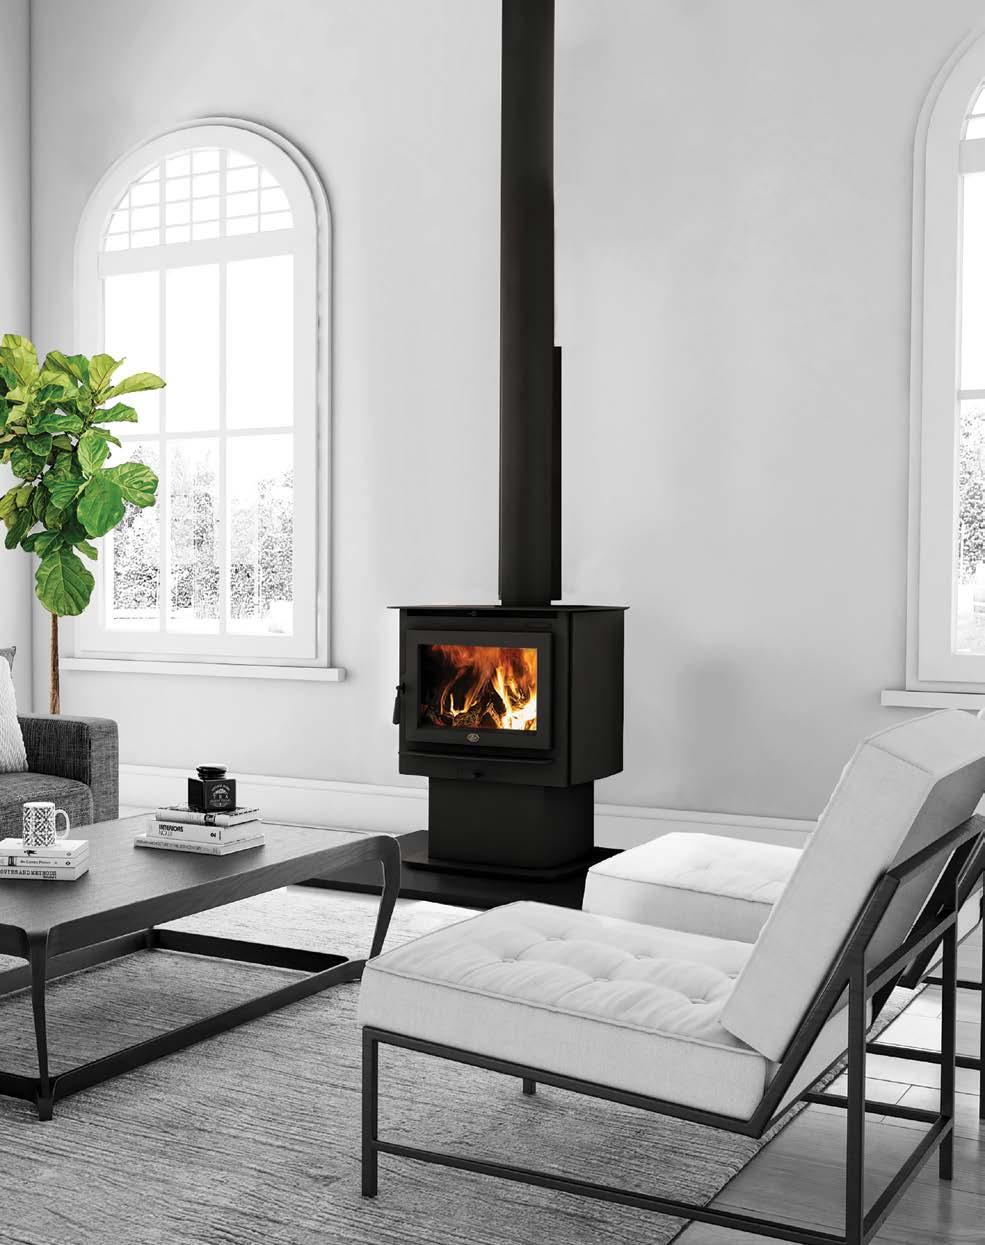 Evergreen The mid-sized Evergreen wood stove with its gentle curved lines complements any home s décor while artfully presenting heavy gauge steel Unibody construction and a cast iron door.